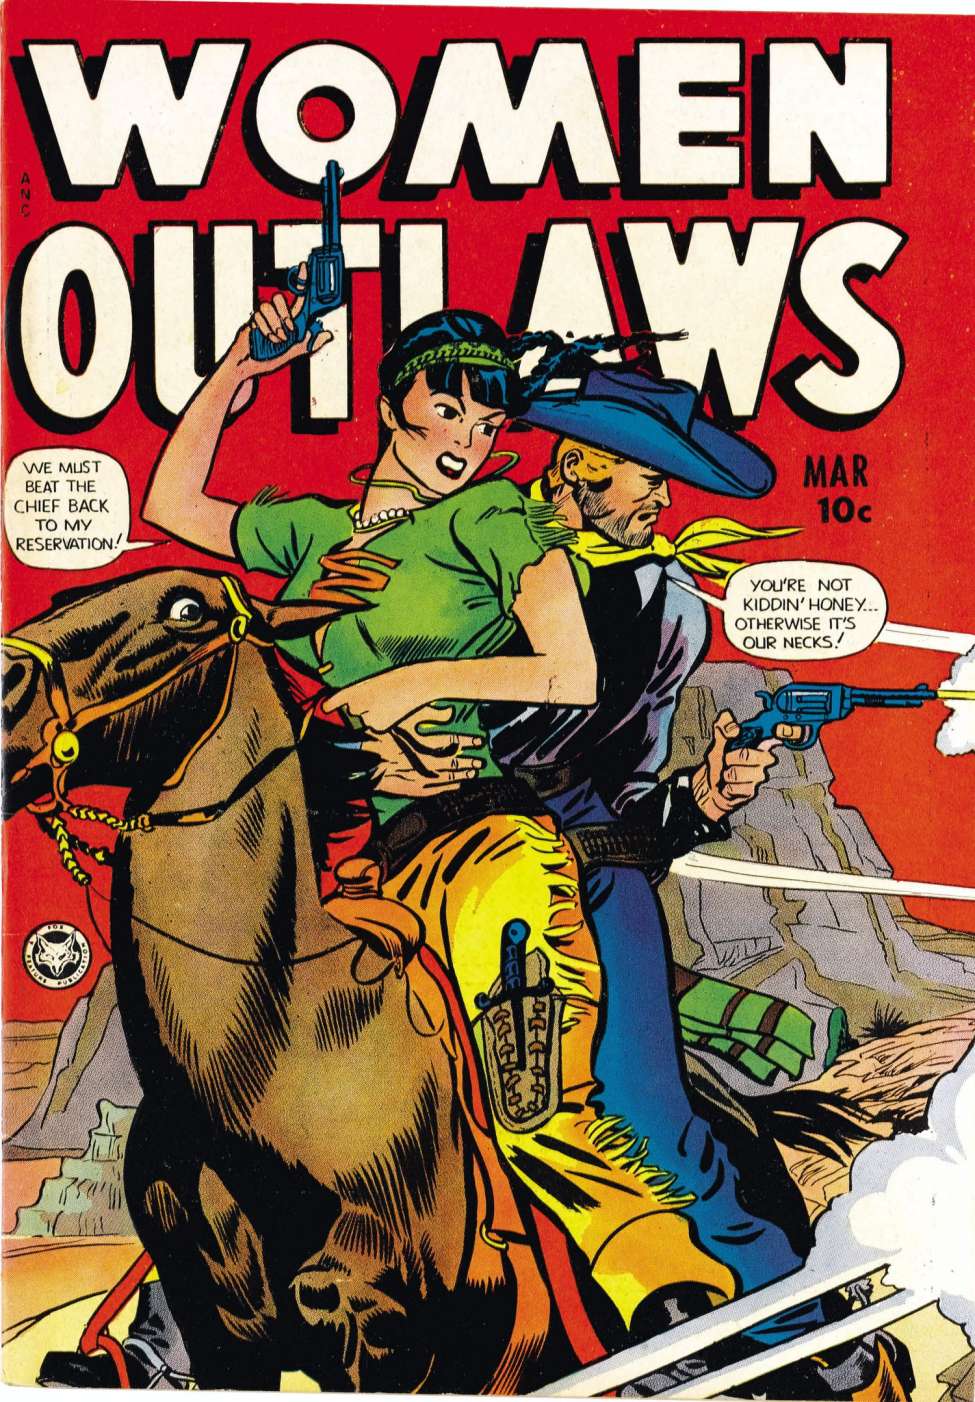 Comic Book Cover For Women Outlaws 5 (inc)